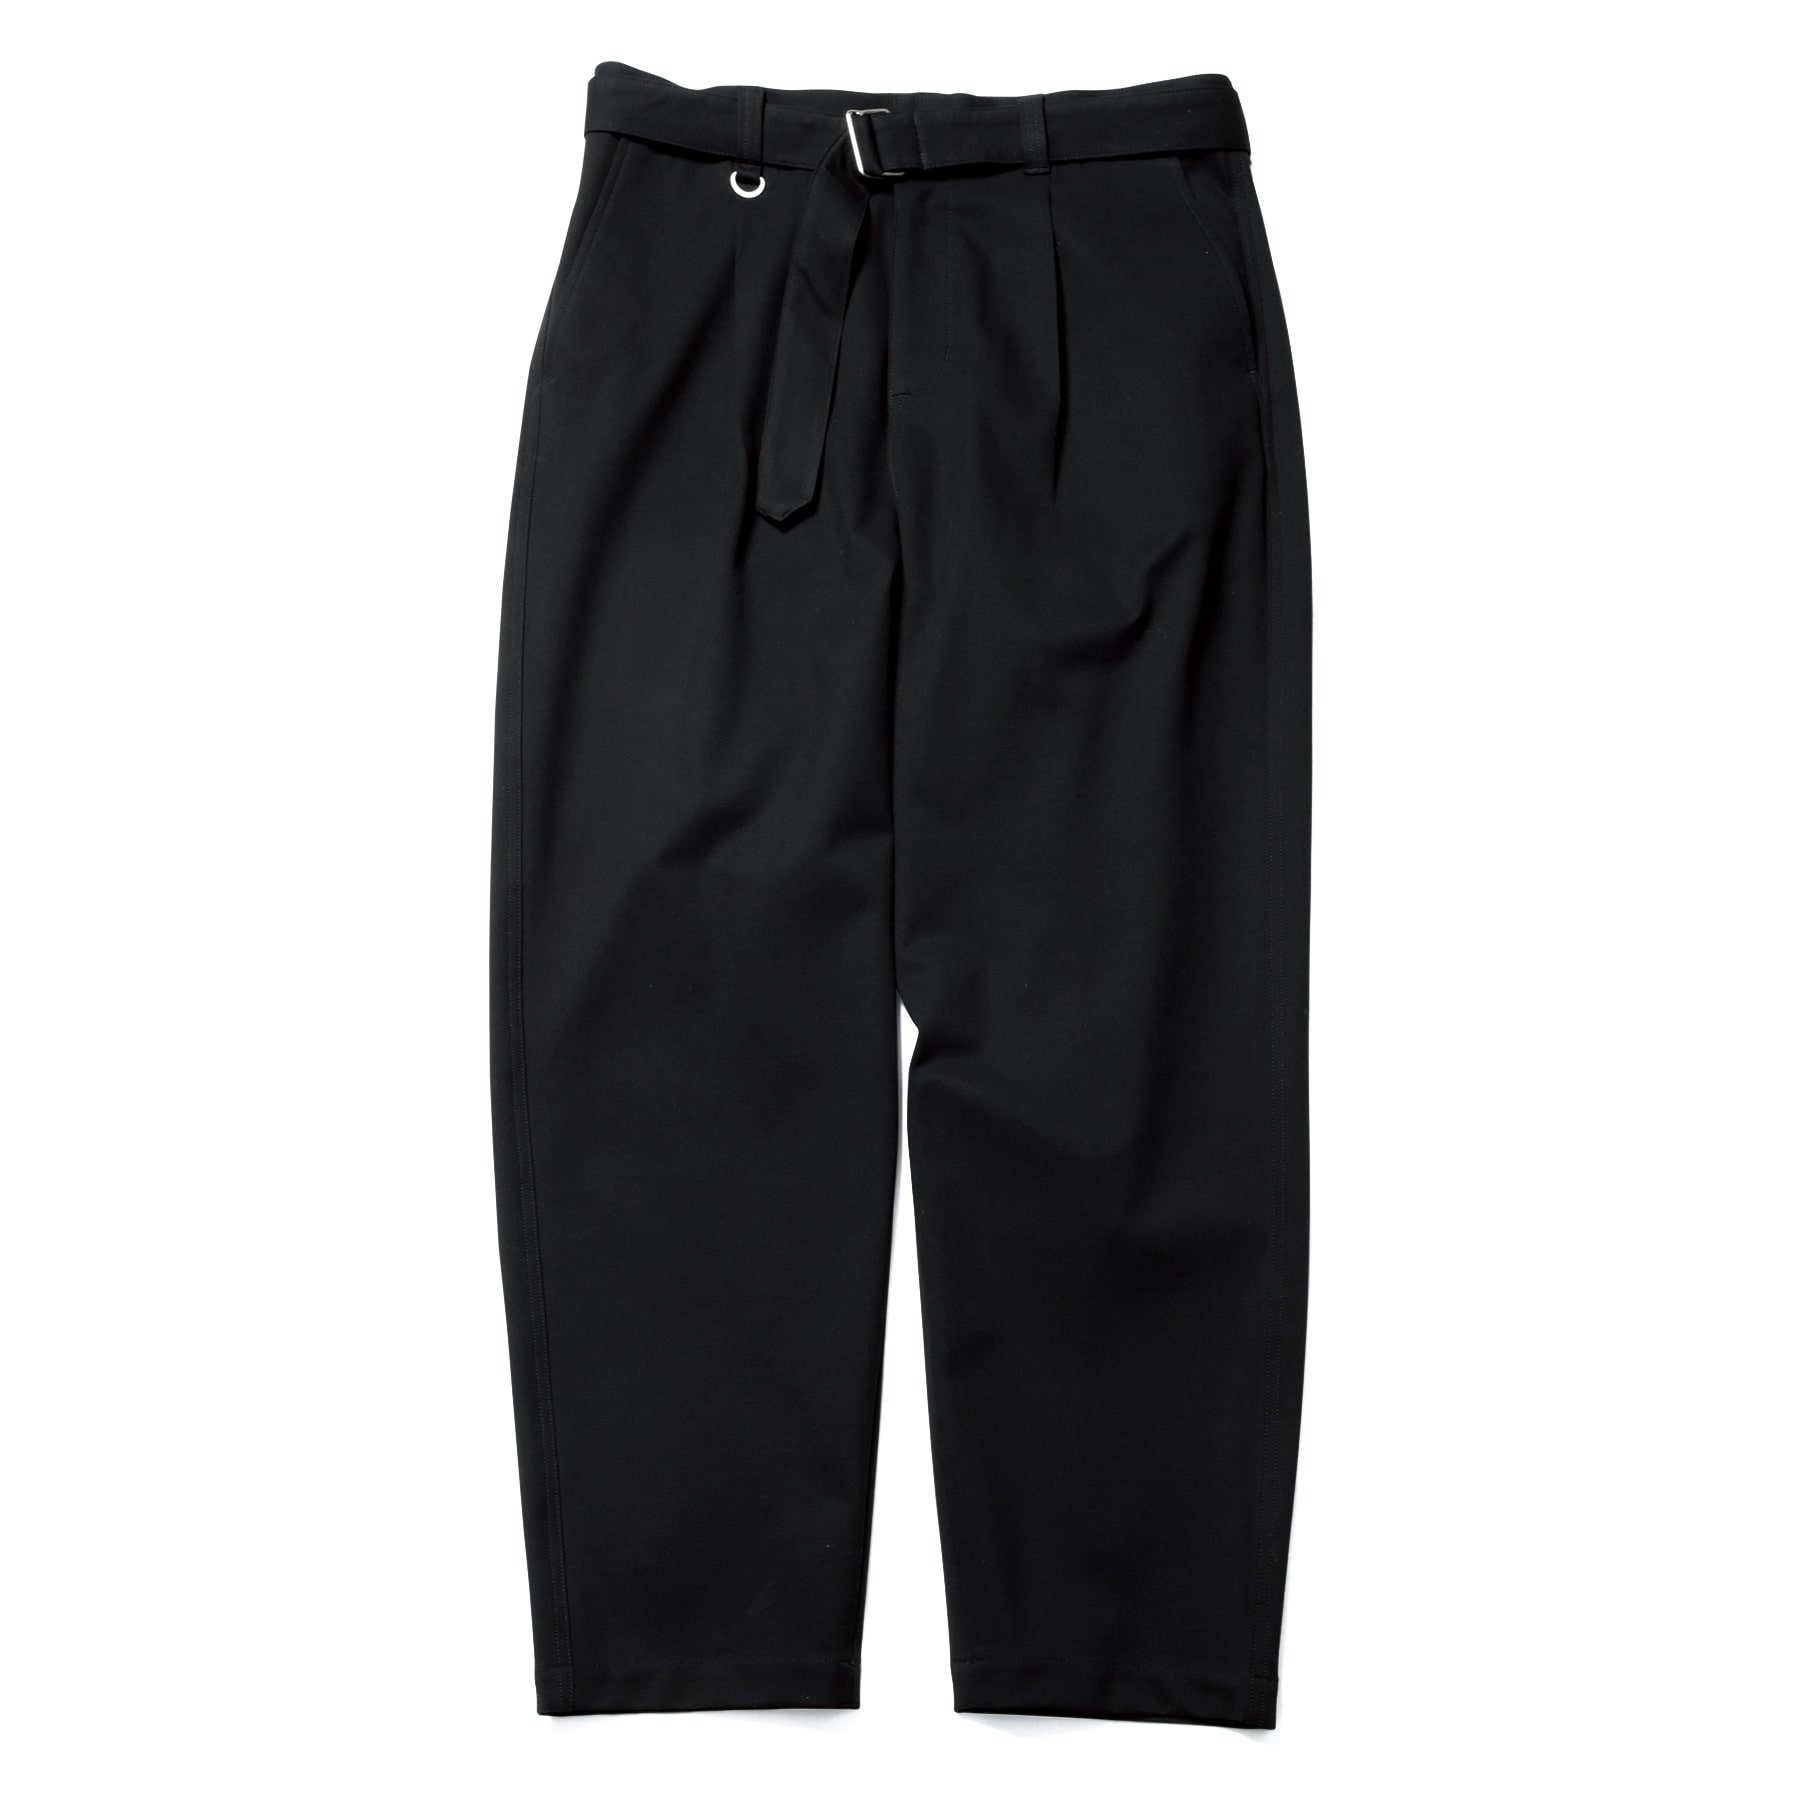 WIDE BELTED BAGGY TUCK TAPERED PANTS(M BLACK) - SOPH.